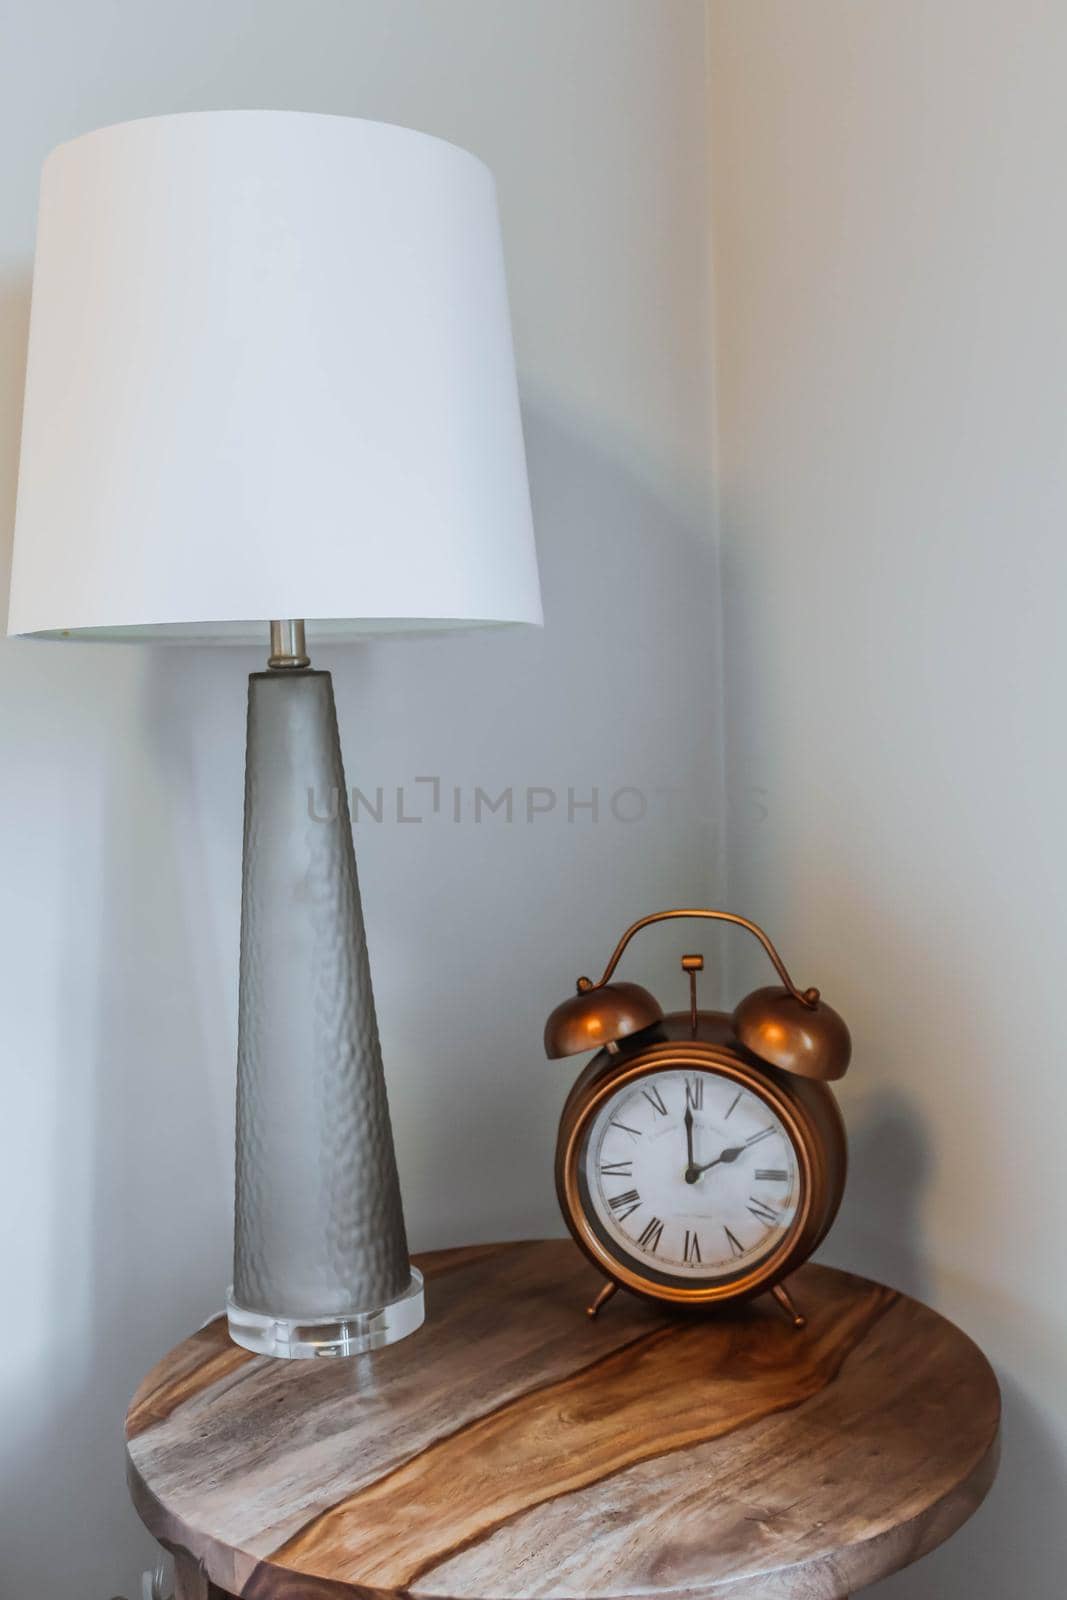 Alarm Clock and Reading Lamp on Bedside Table. Copy Past text by JuliaDorian